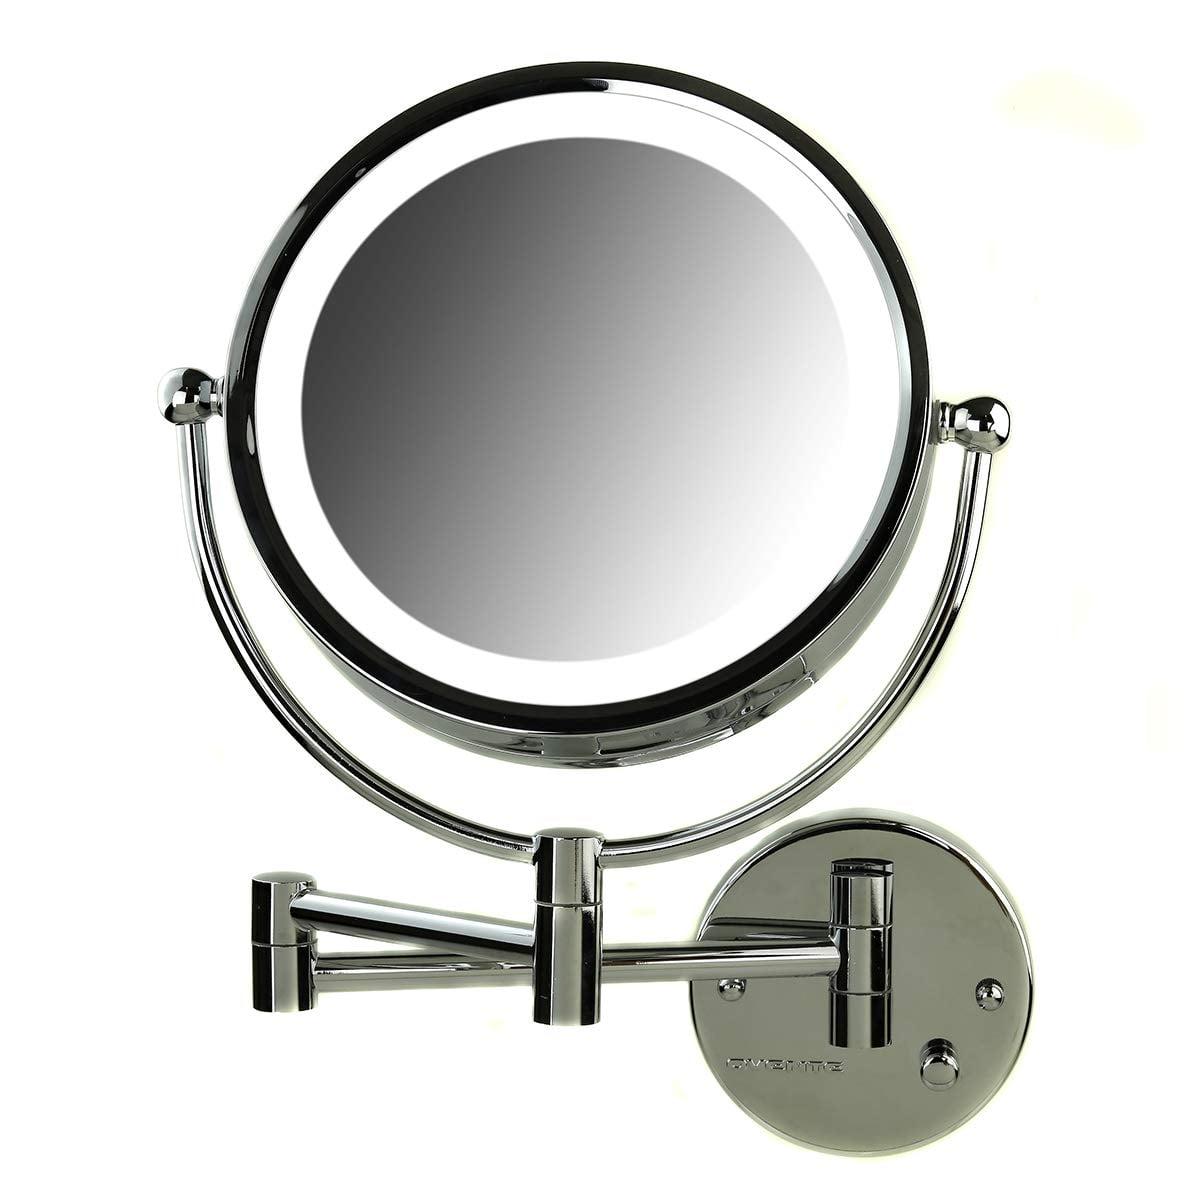 Elegant Polished Chrome LED Wall-Mounted Makeup Mirror 8.5" with Dual Magnification